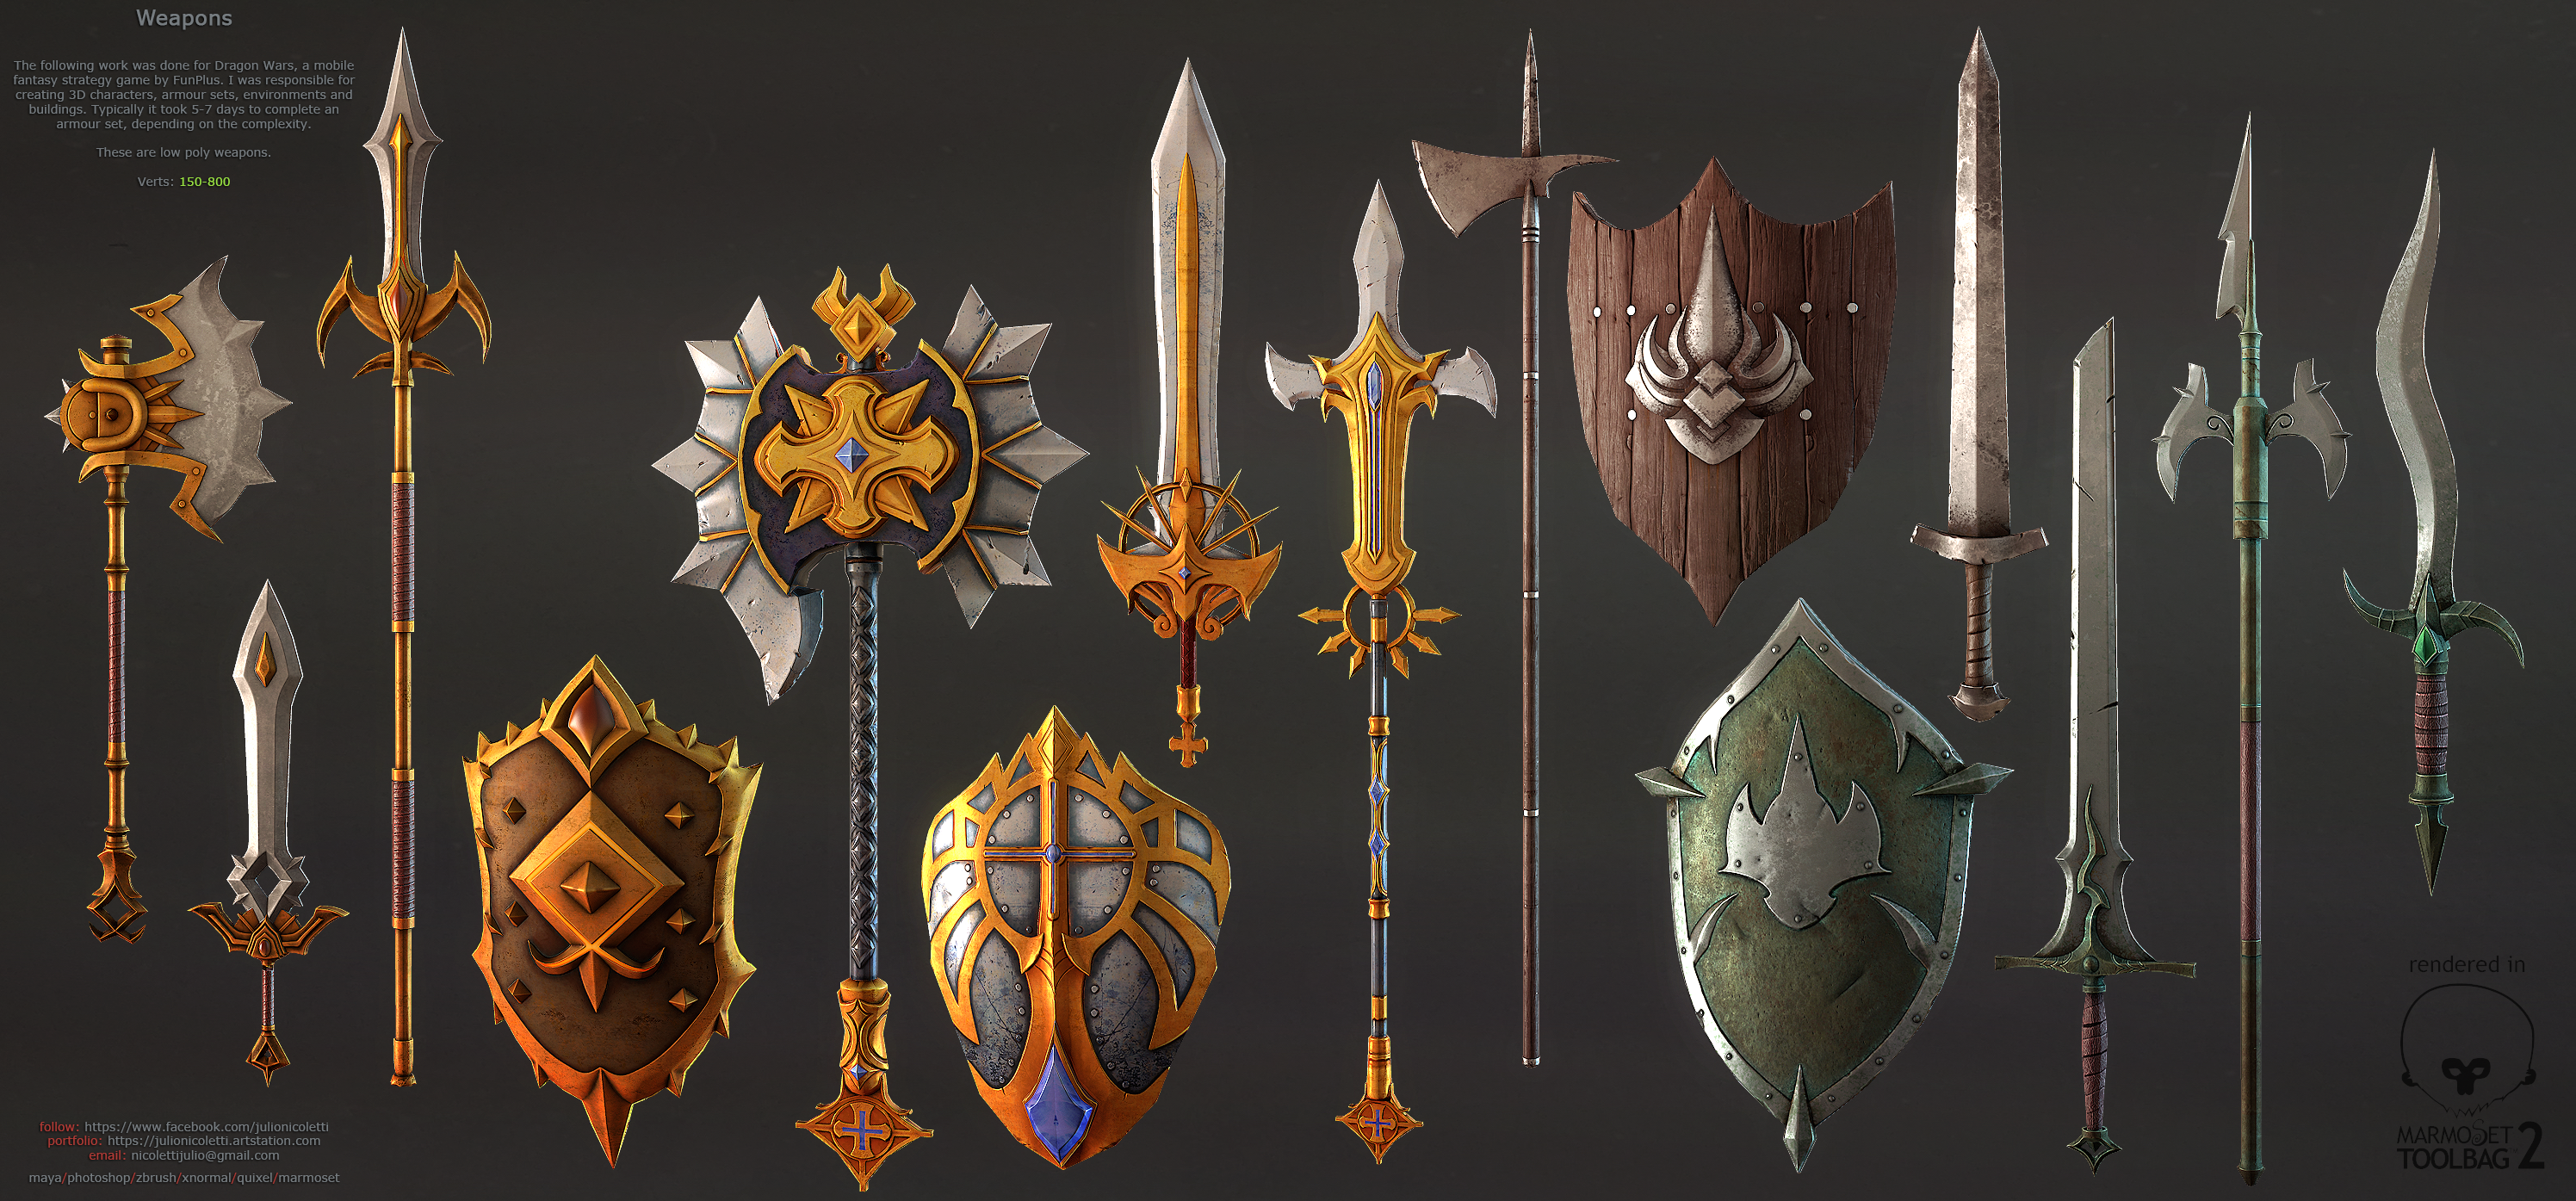 weapons_by_julionicoletti-d942ajz.png